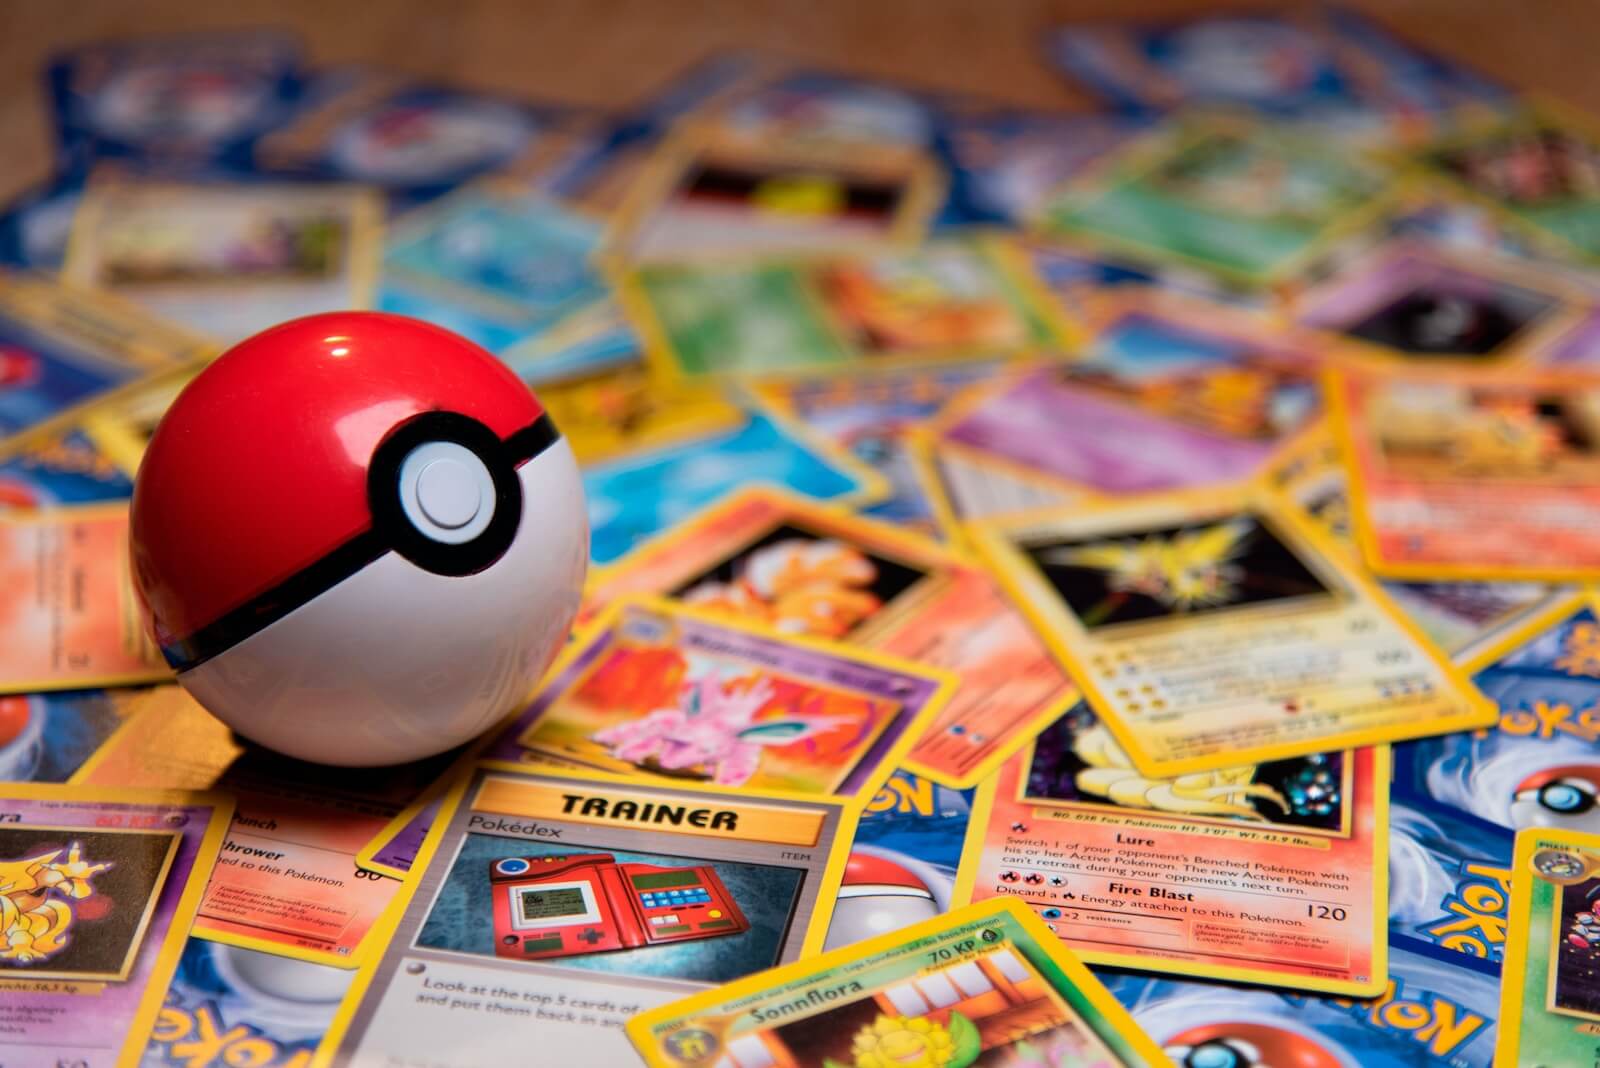 red and white Pokéball on a pile of PTCG cards Photo by Thimo Pedersen